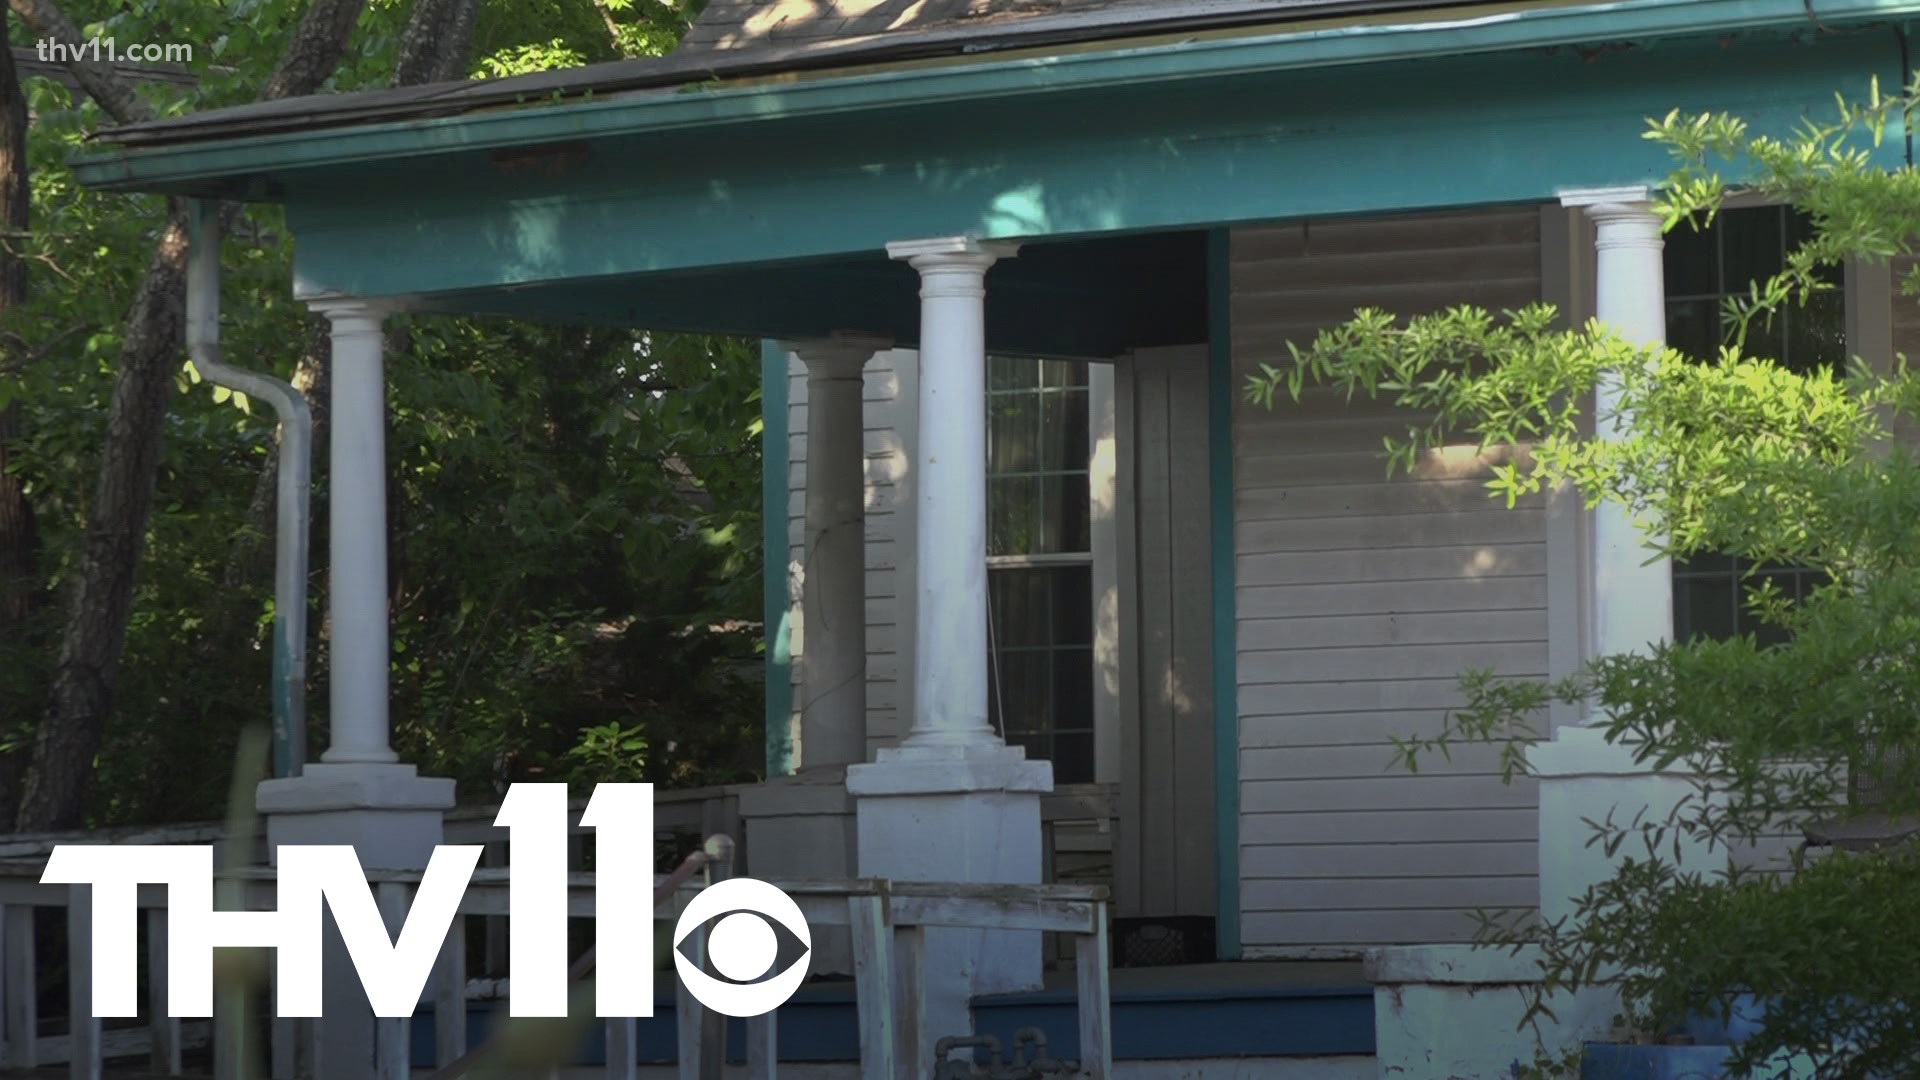 After a federal judge lifted the CDC's eviction moratorium on Wednesday, many Arkansans are struggling to pay rent and now face the risk of eviction.